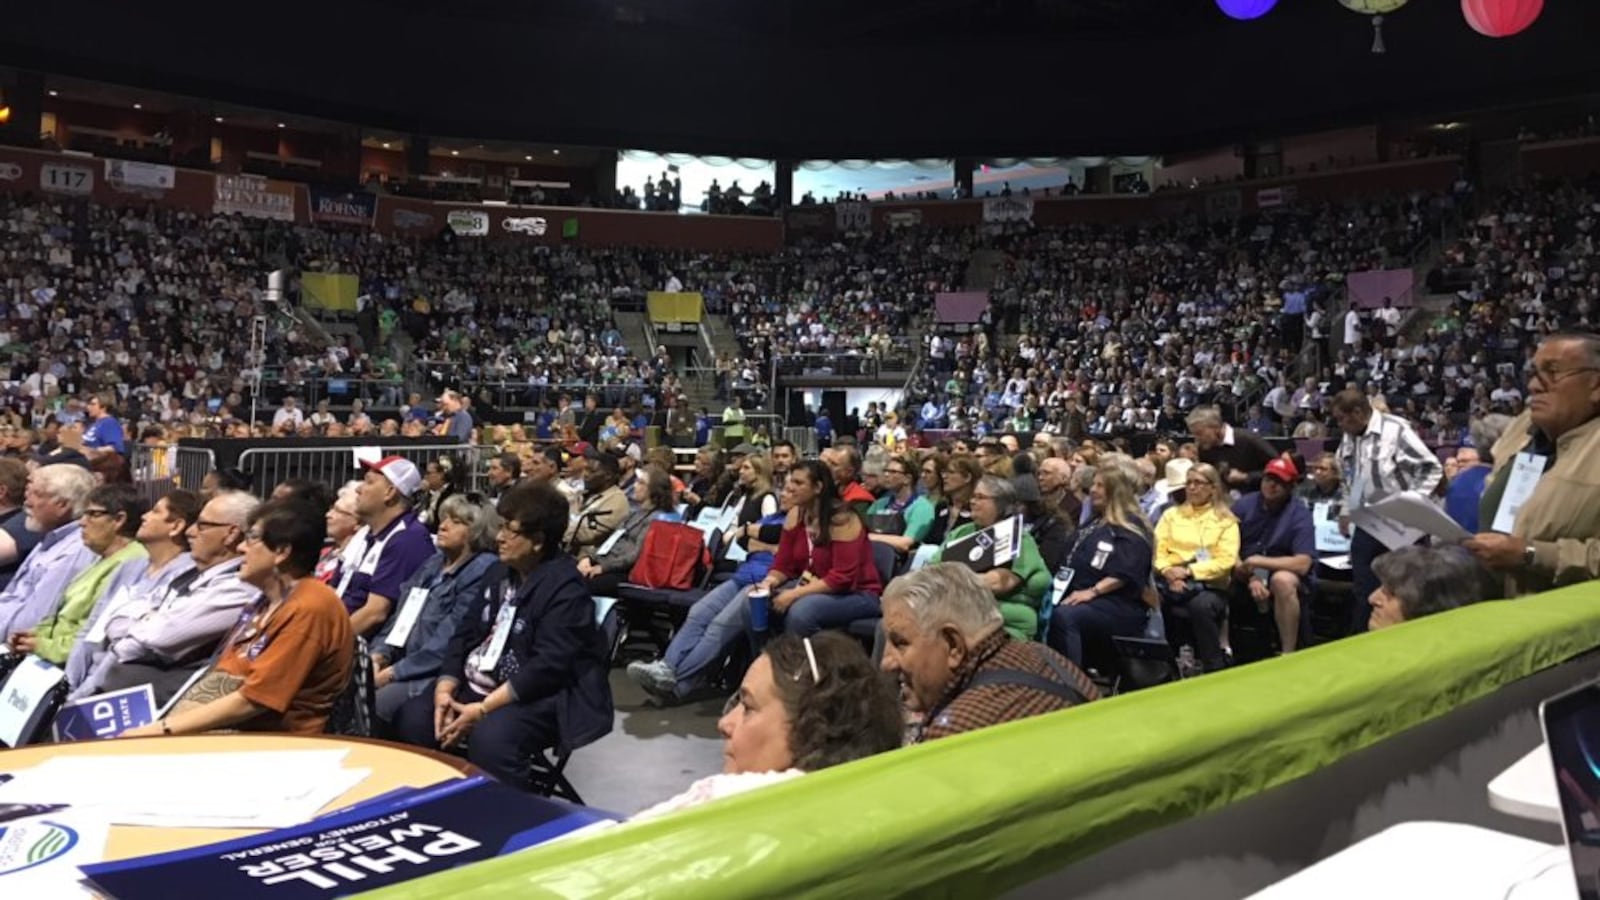 More than 3,400 delegates gathered in the First Bank Center in Broomfield Saturday for the Democratic state assembly. (Erica Meltzer/Chalkbeat)